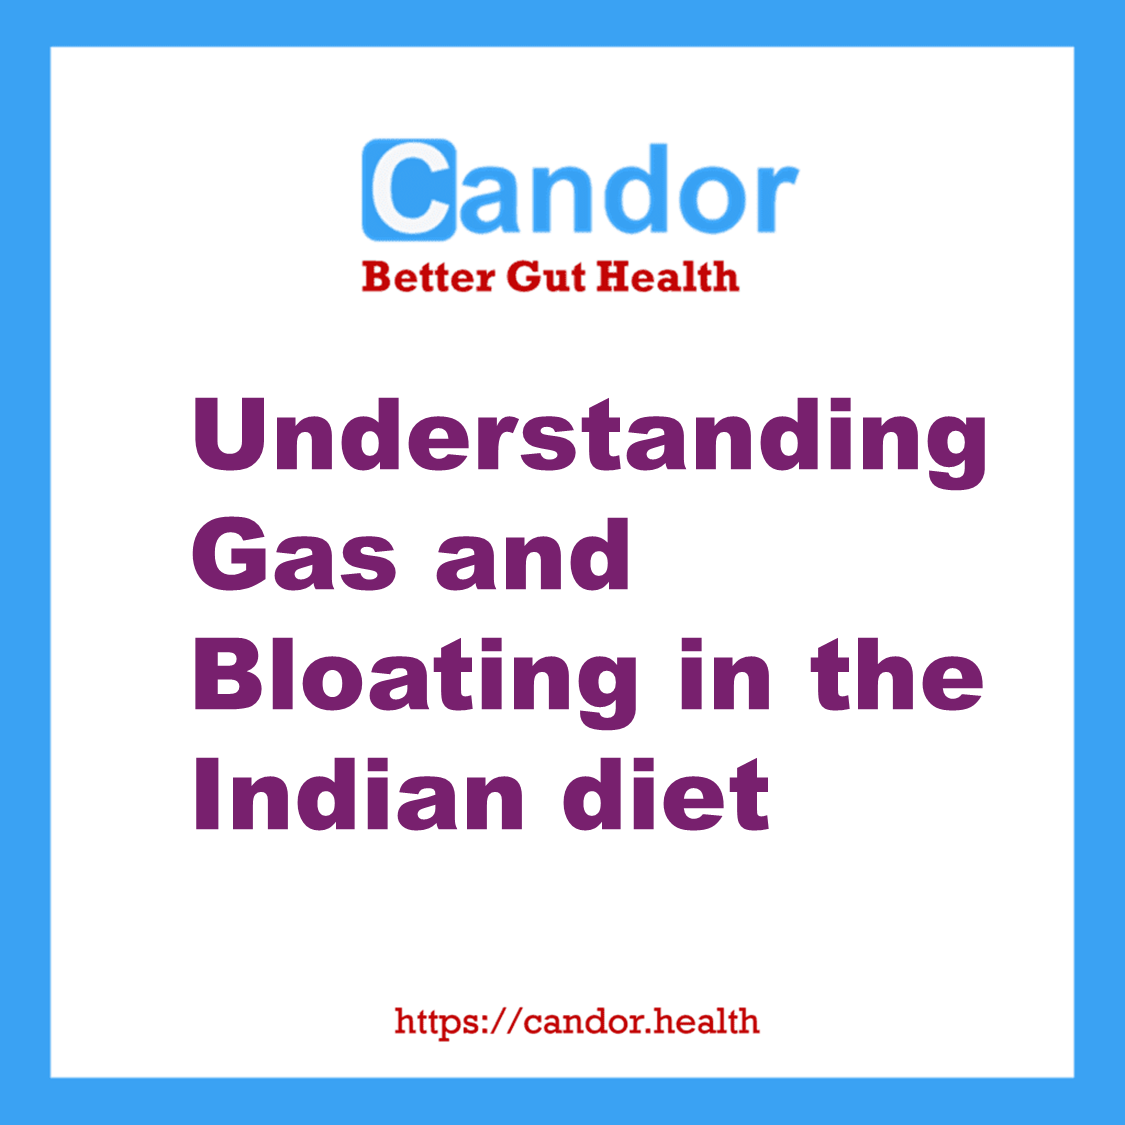 gas and bloating in the indian diet